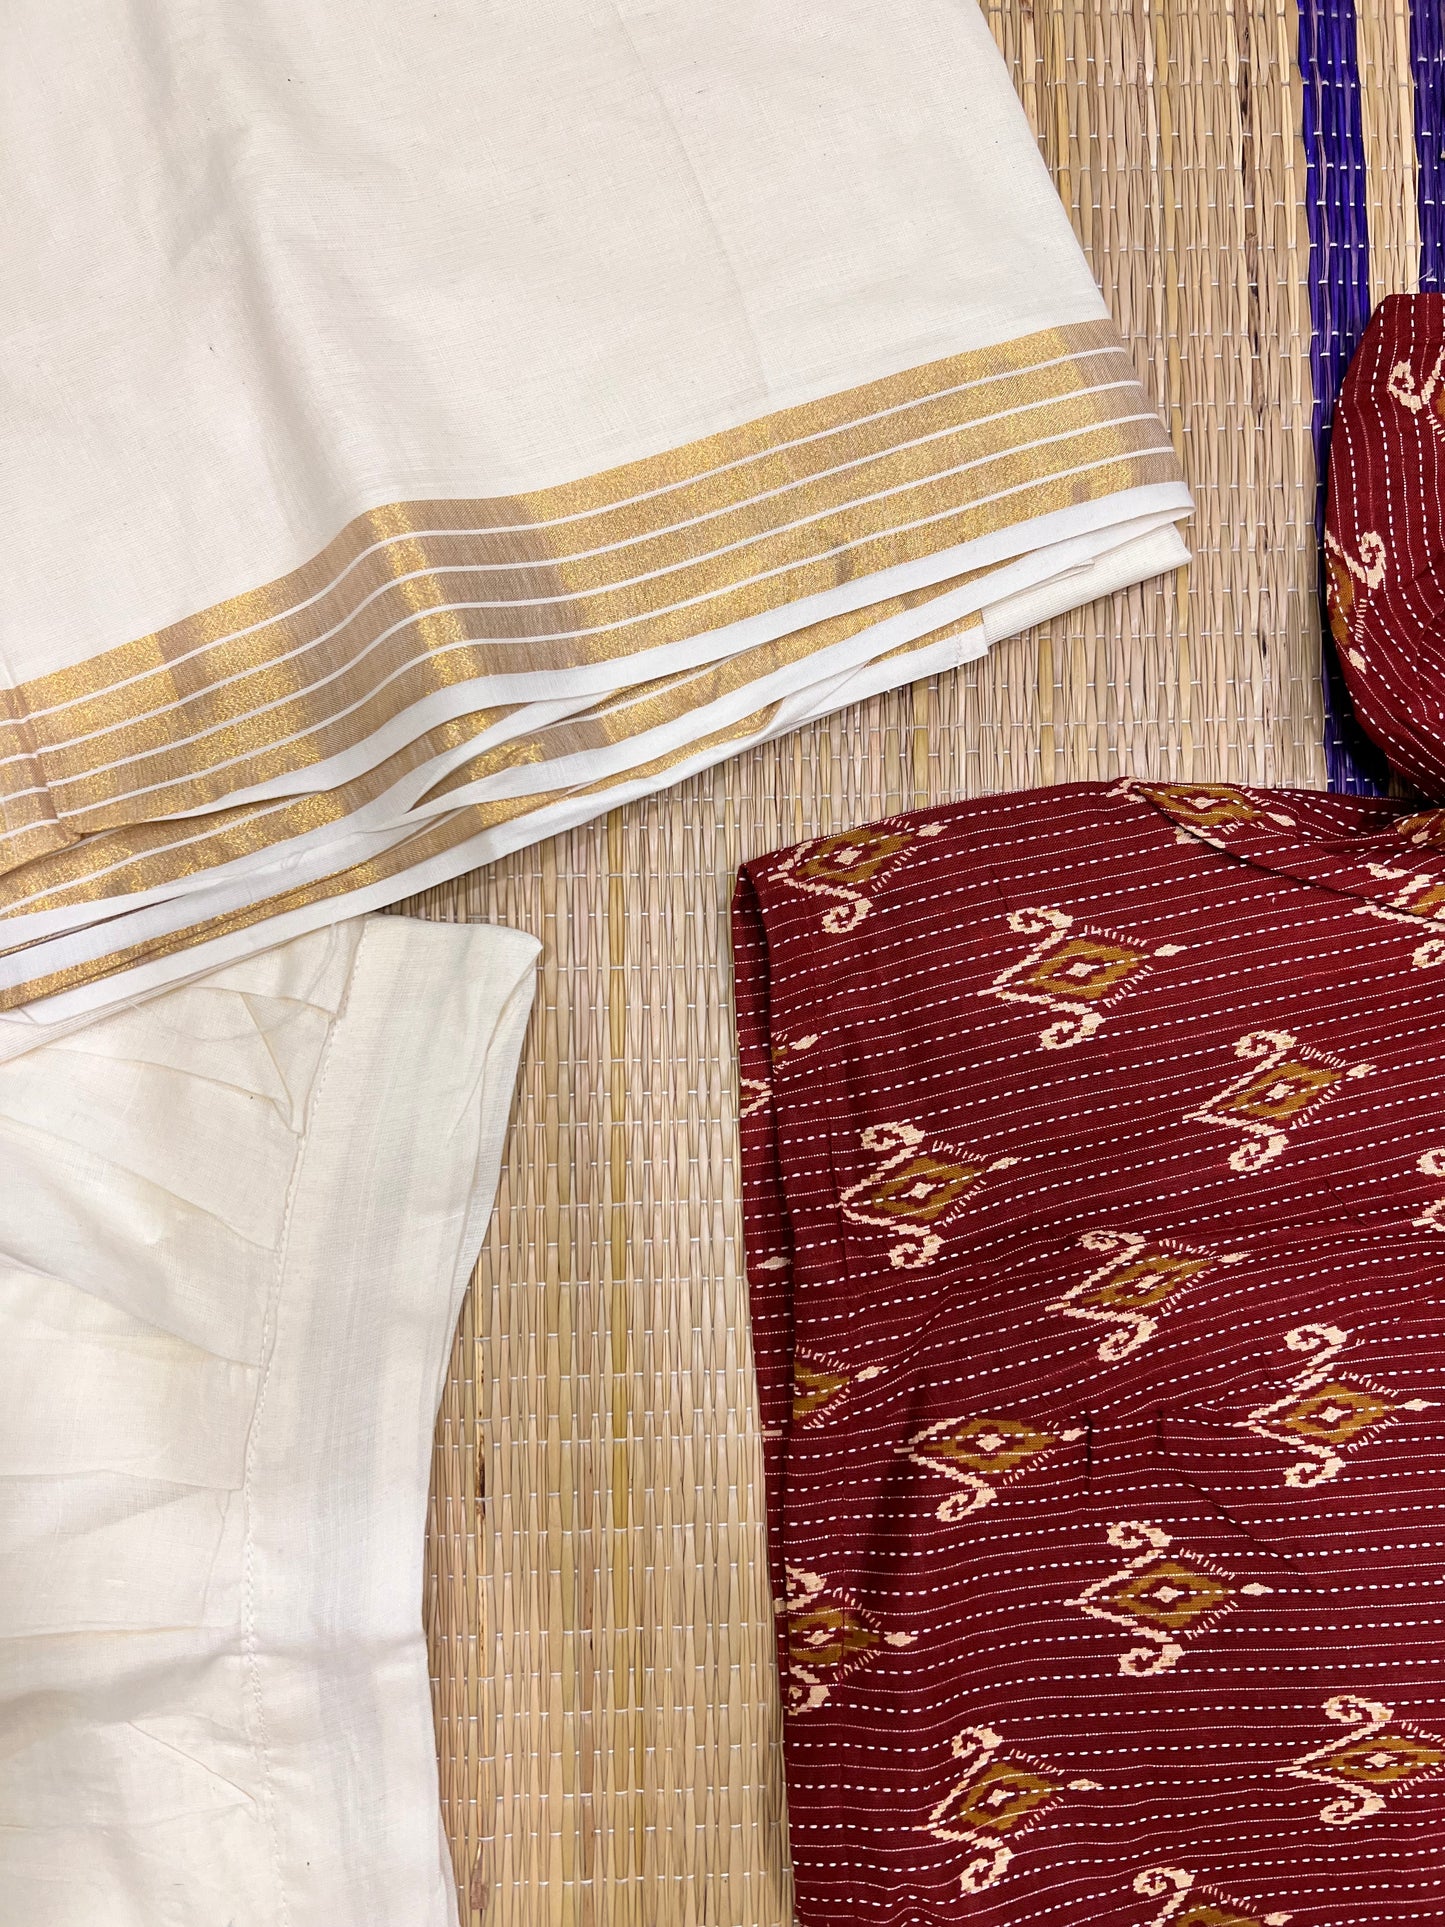 Pure Cotton Maroon Crop Top Dhavani Set with Off White Pavada and Neriyathu with Kasavu Border